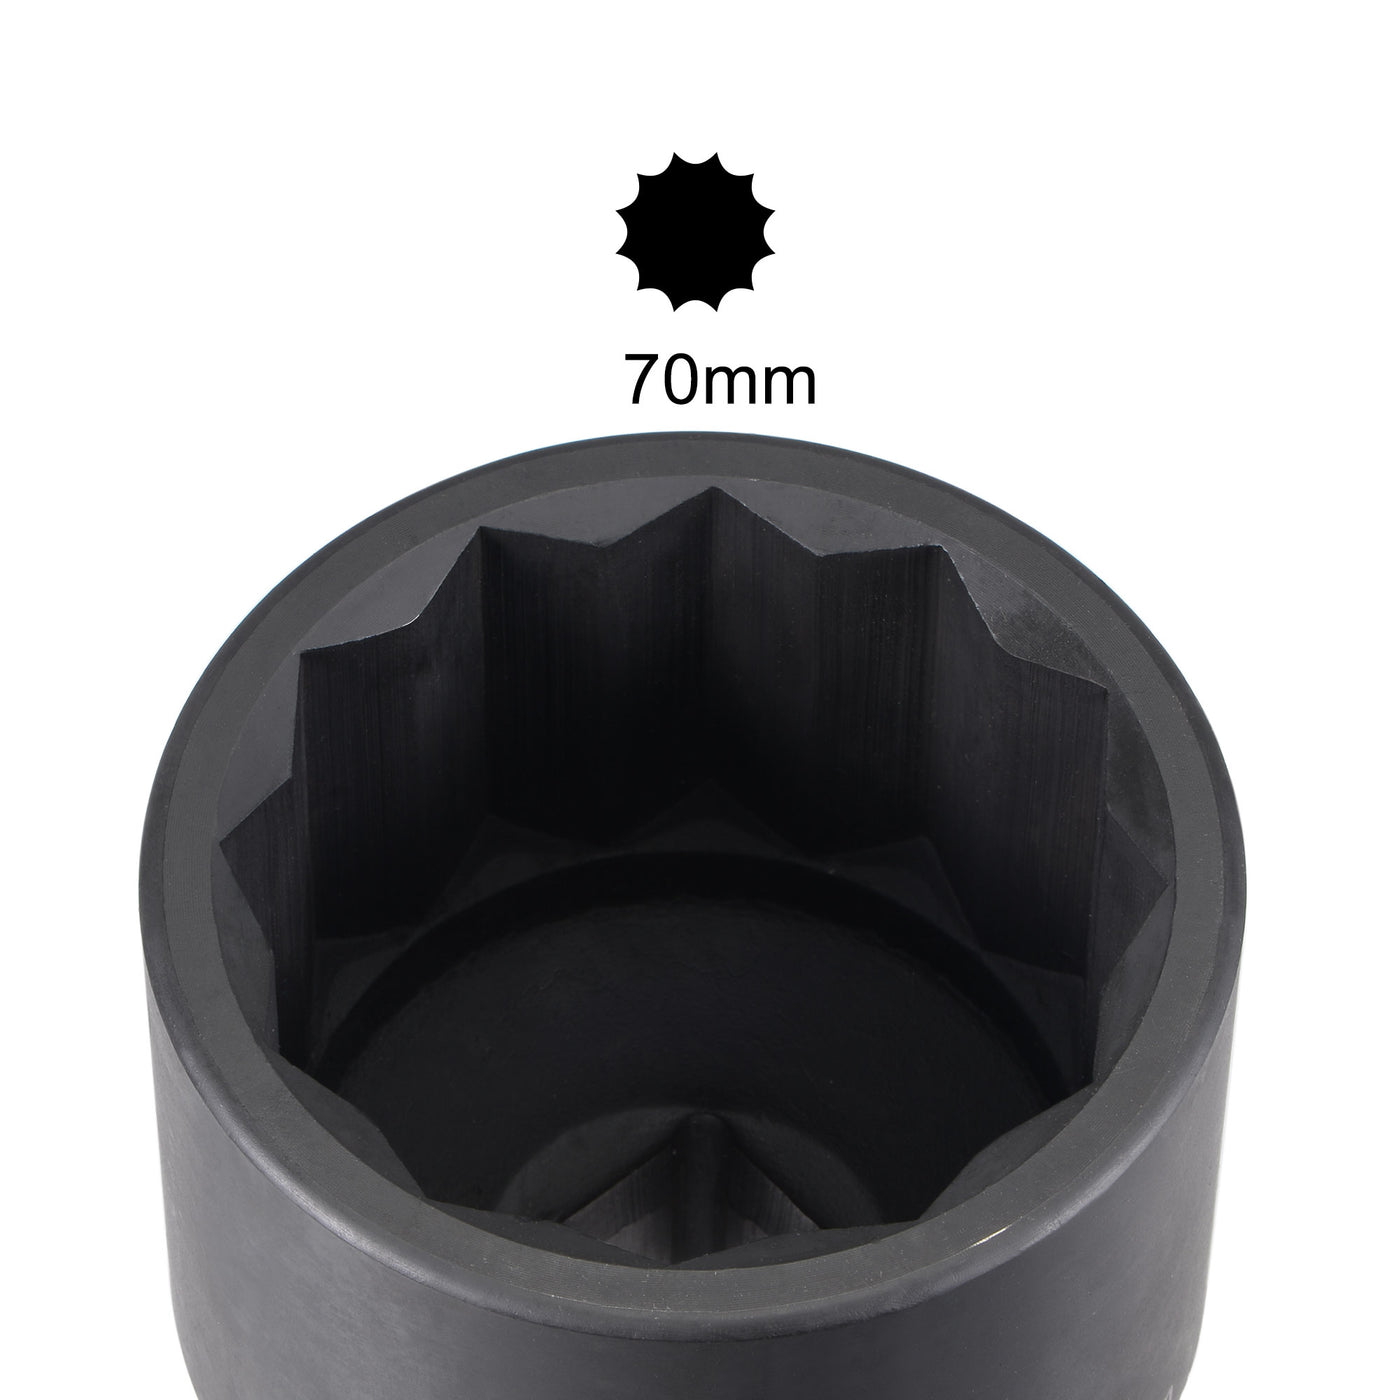 uxcell Uxcell 1-Inch Drive 70mm 12-Point Impact Socket, CR-MO Steel 104mm Length, Standard Metric Sizes